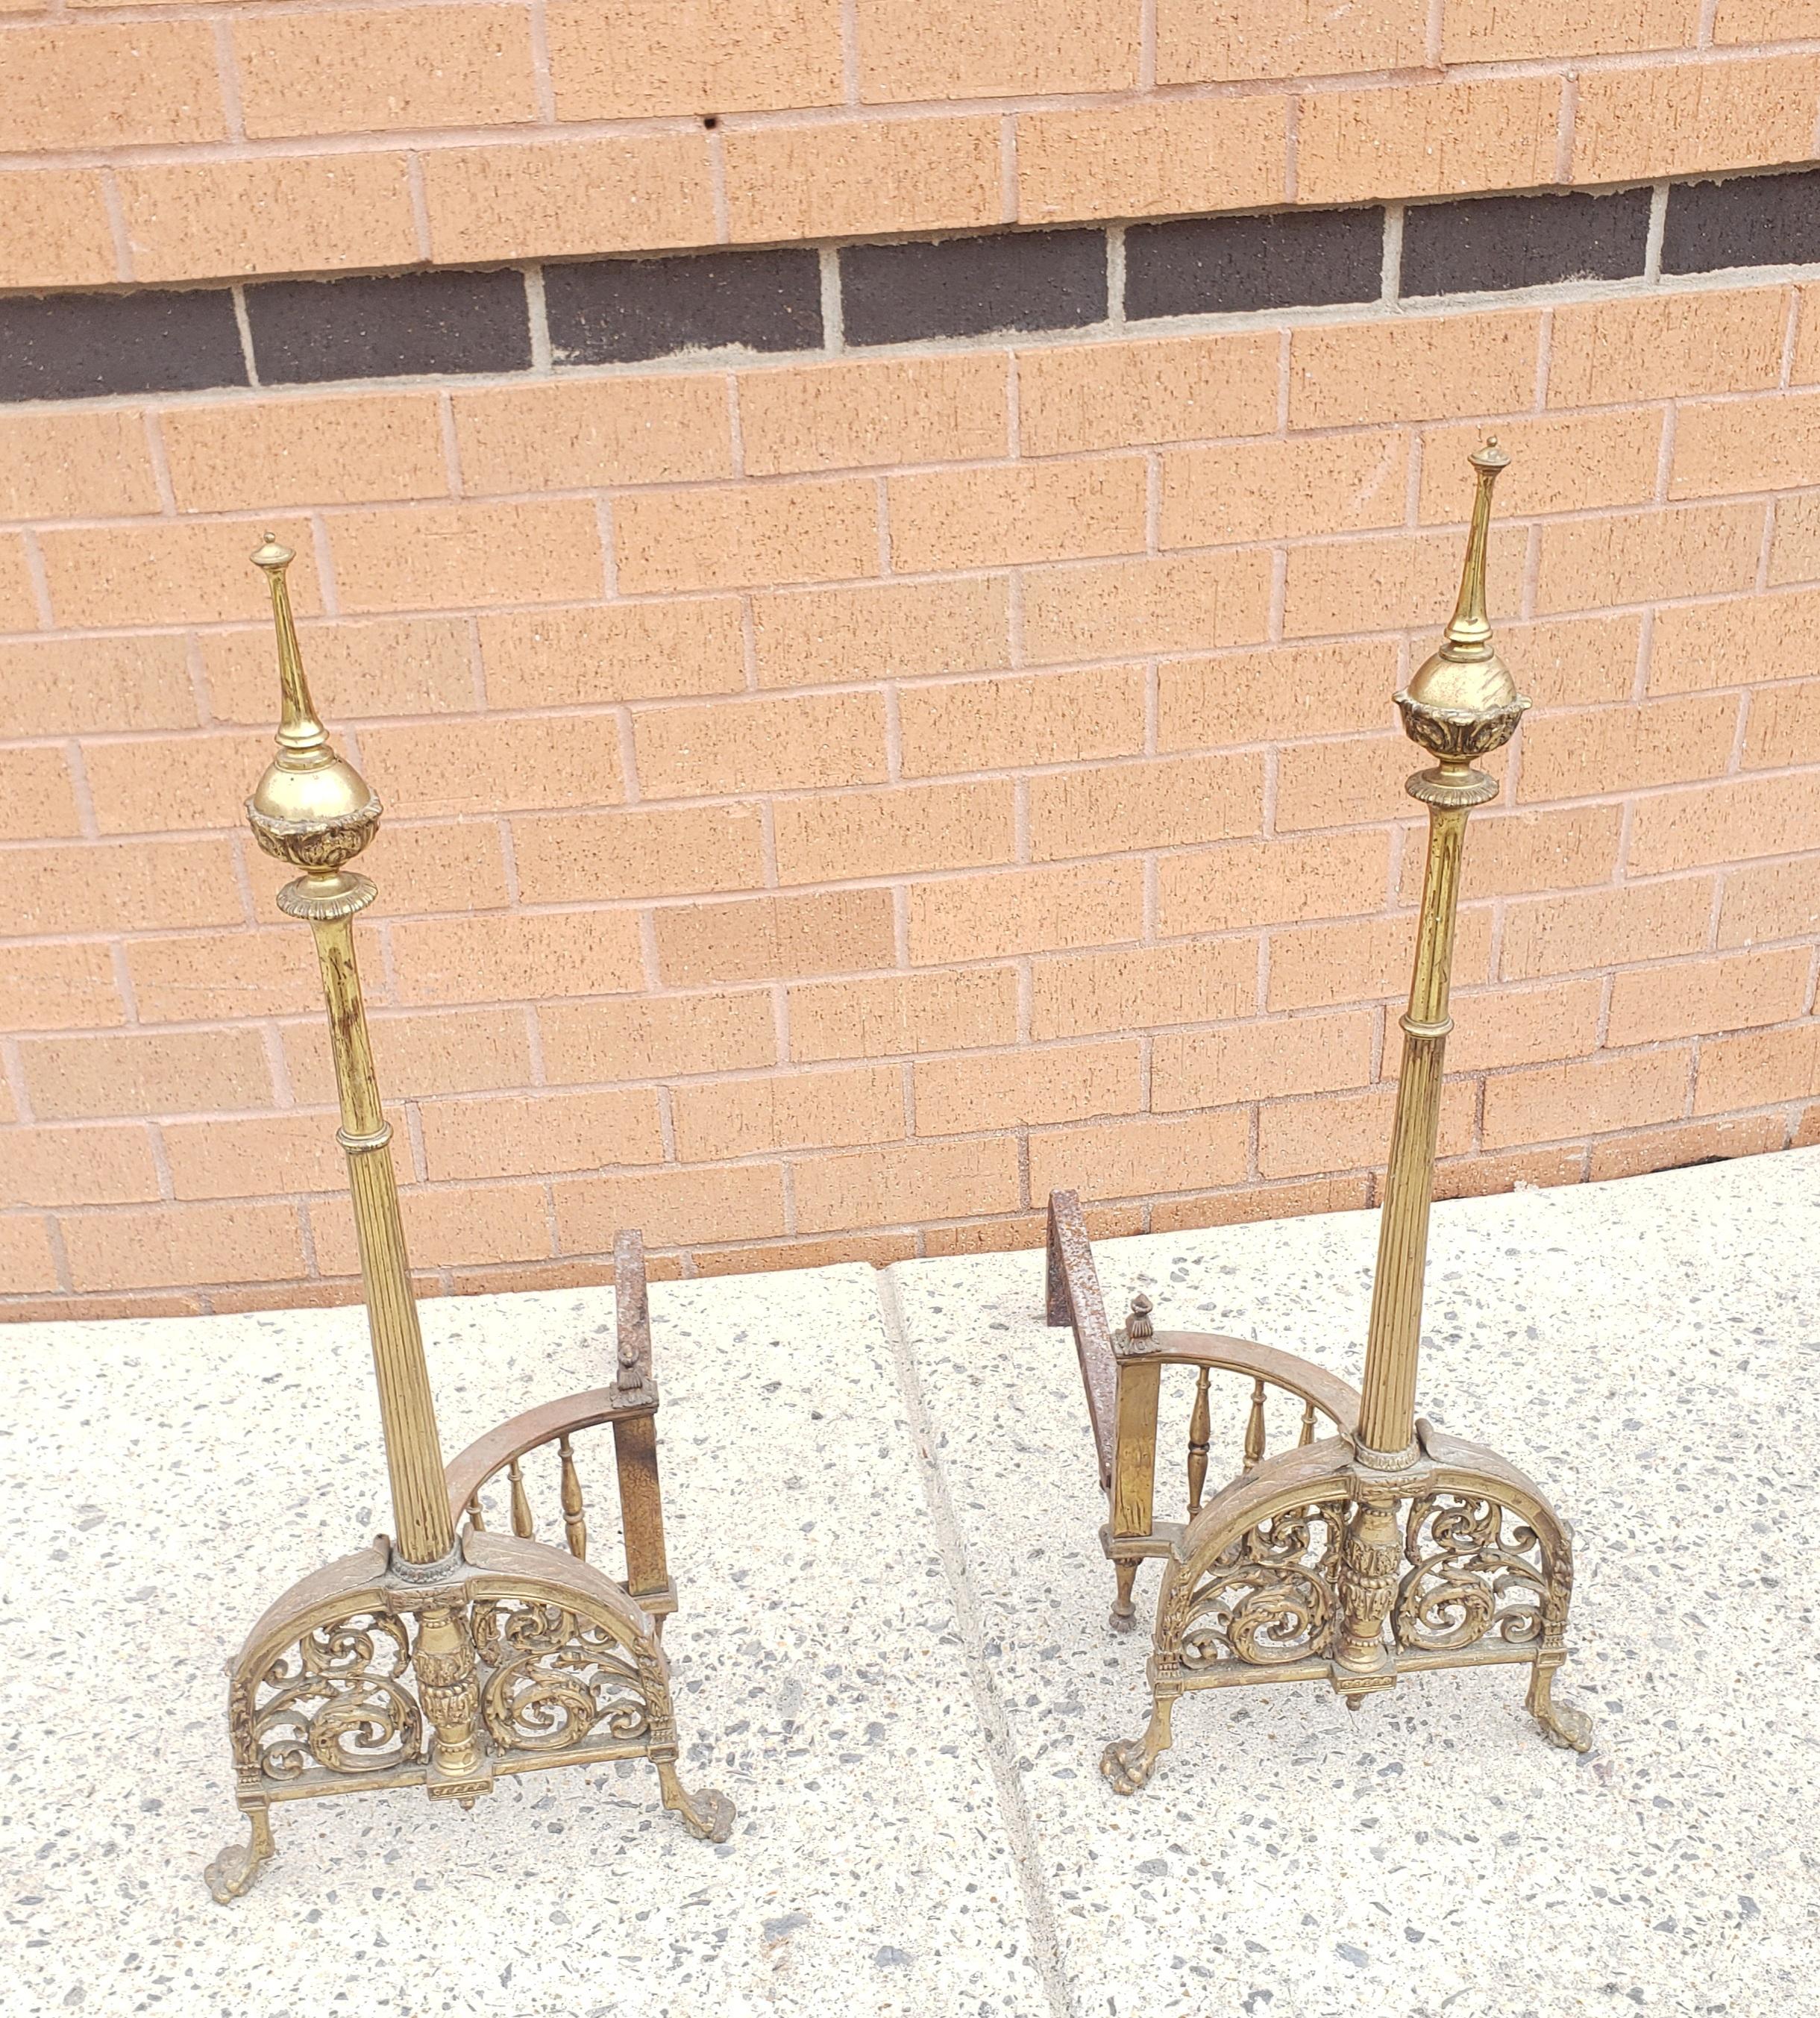 Early 20th Century Tall French Empire Brass and Iron Andirons, Pair. Measure 12